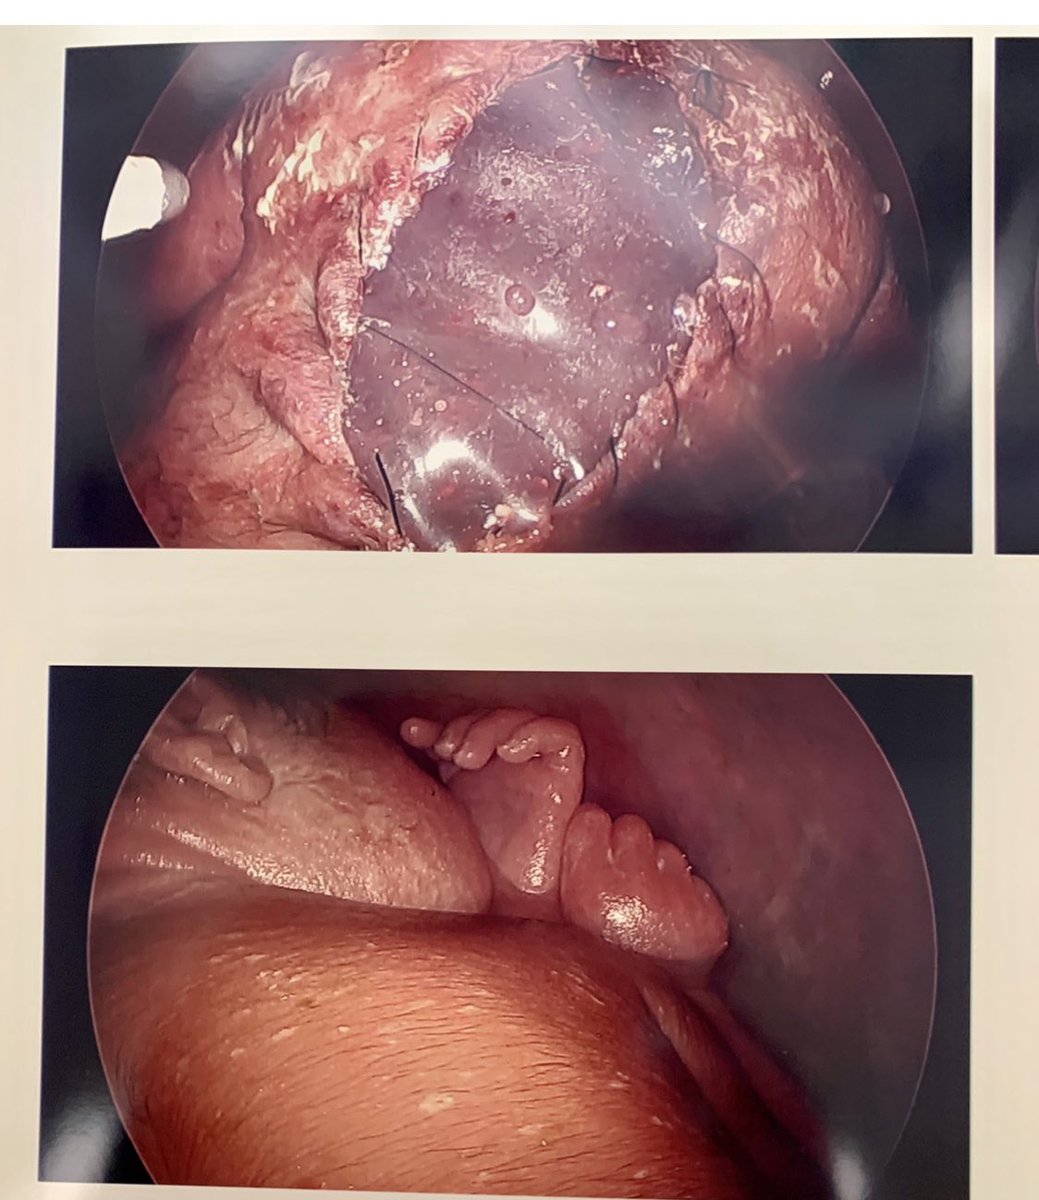 Fetoscopic spina bifida repair in 3 layers. The skin defect was large, so a skin substitute was used for coverage. #spinabifida *shown with permission